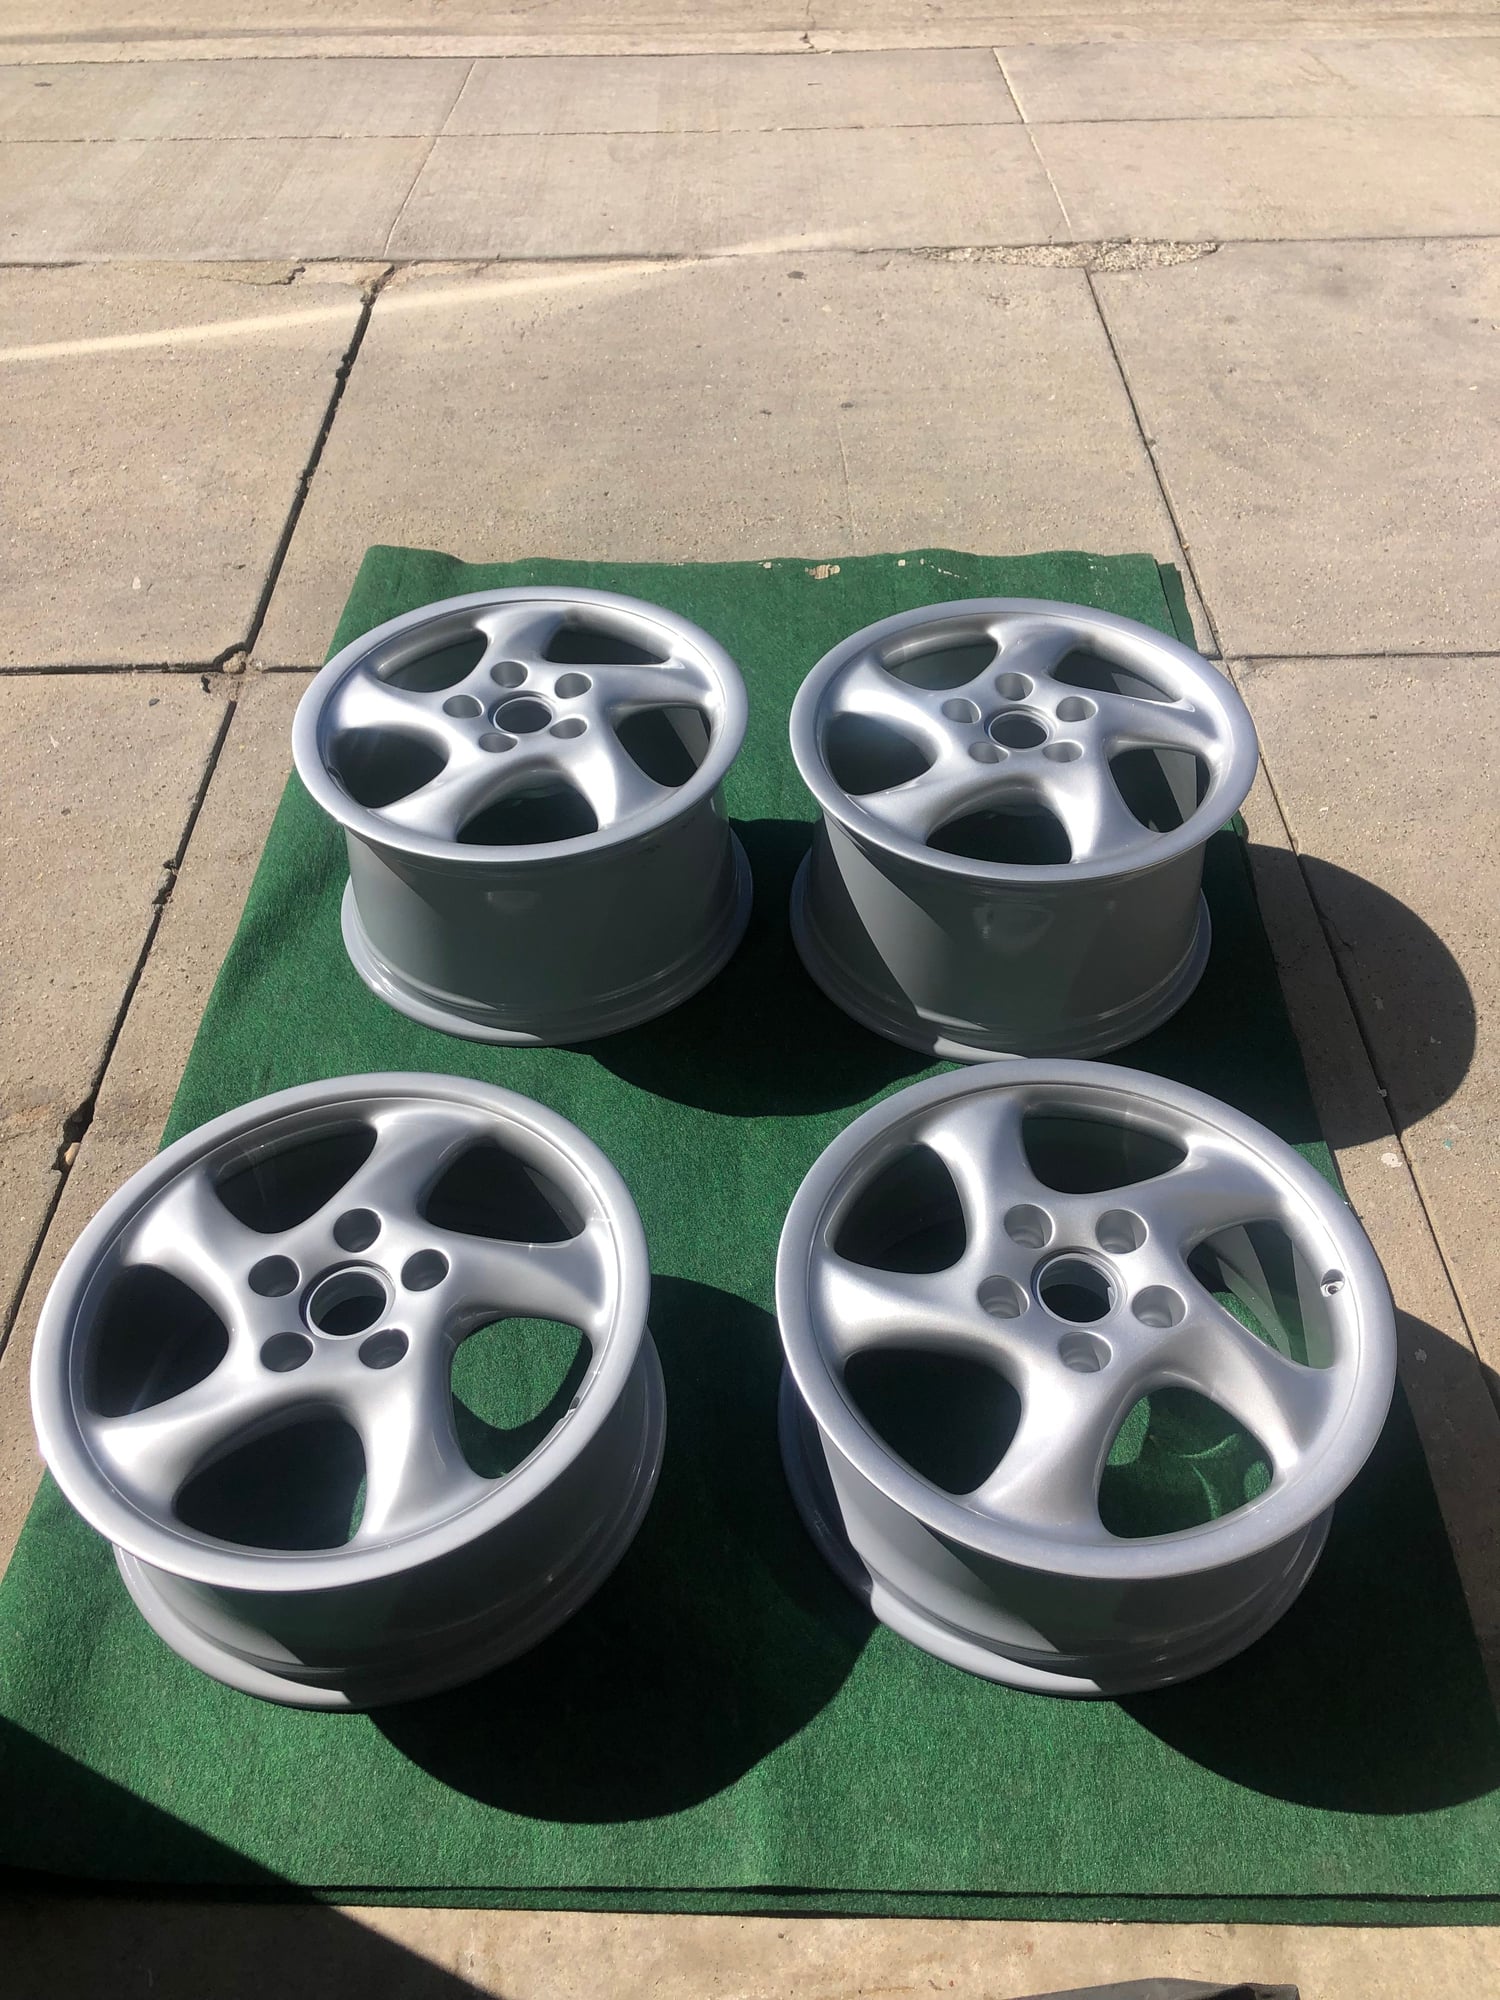 Wheels and Tires/Axles - 993 18” x 7.5/10” Turbo Twists Hollow Spoke Wheels - Used - 1995 to 2004 Porsche 911 - Manhattan Beach, CA 90266, United States